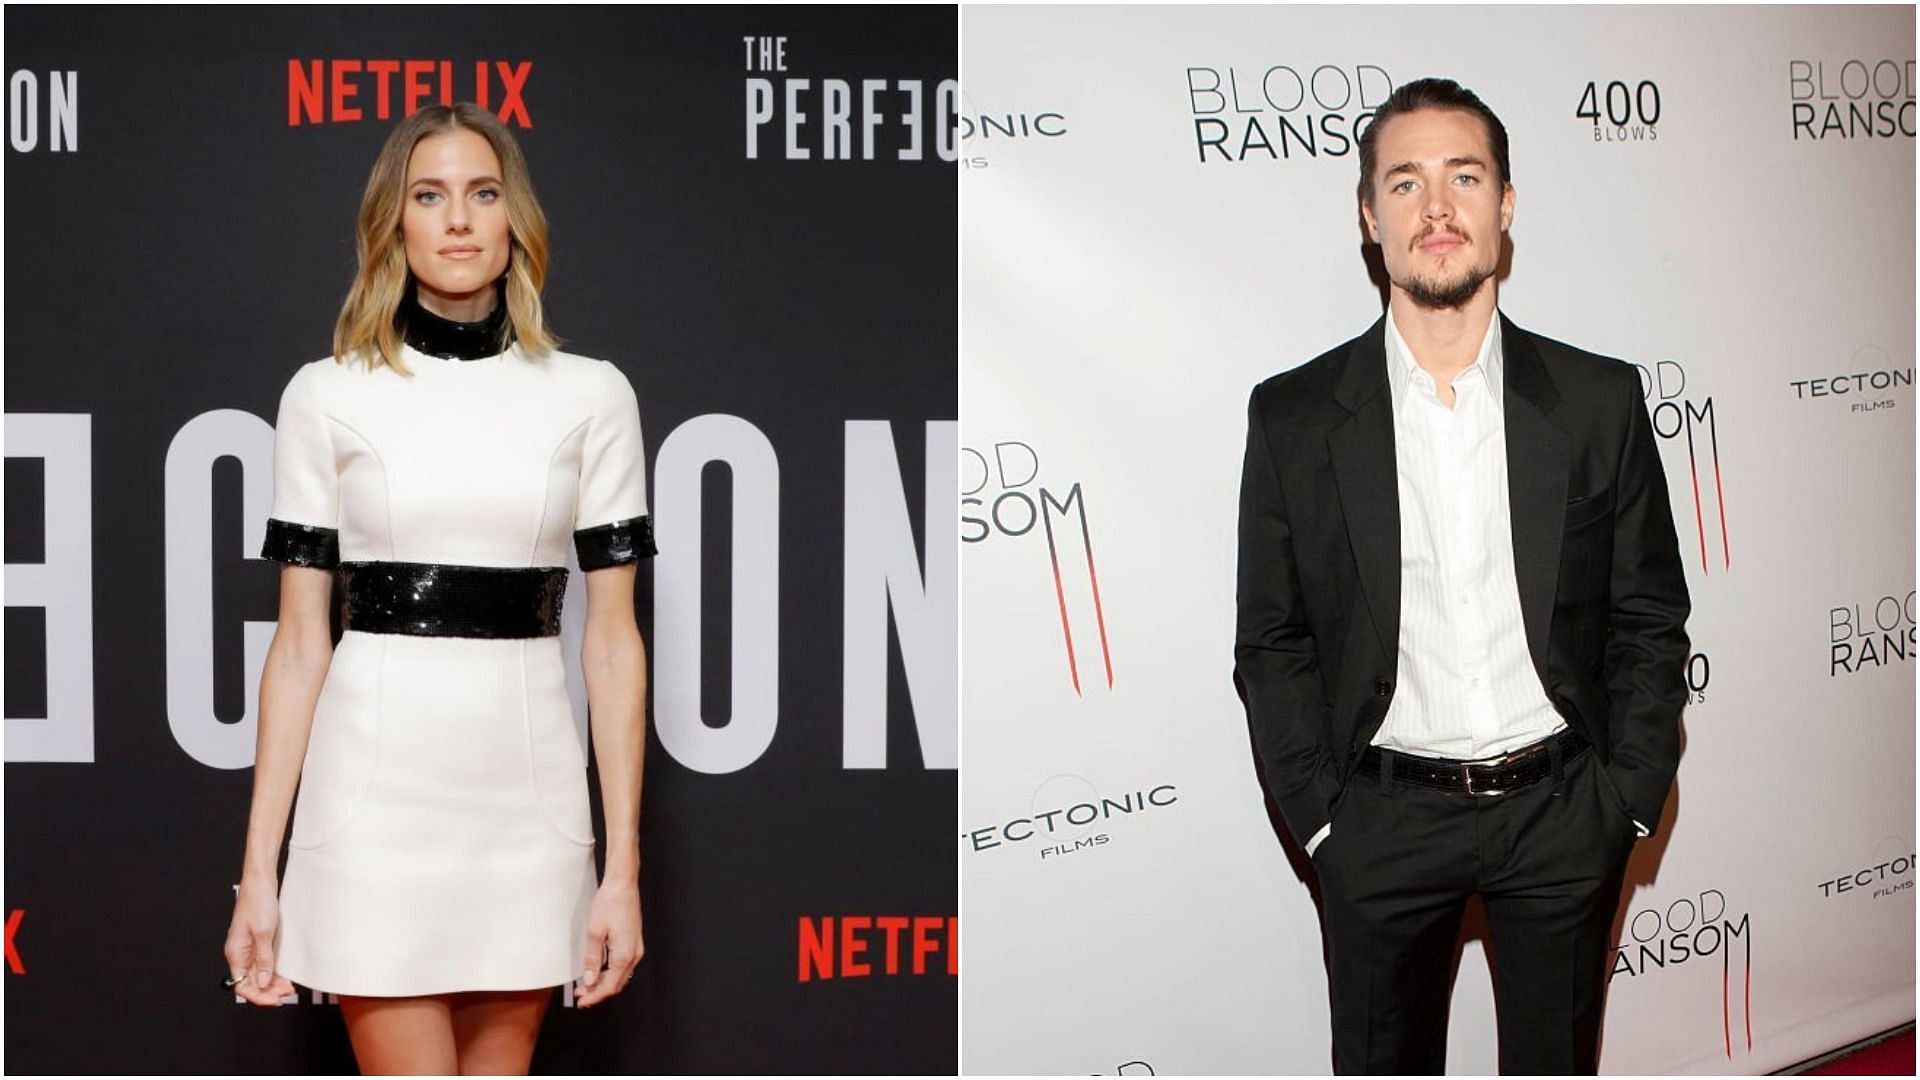 Allison Williams and Alexander Dreymon have been in a relationship since 2019 (Images via JP Yim and Michael Bezjian/Getty Images)